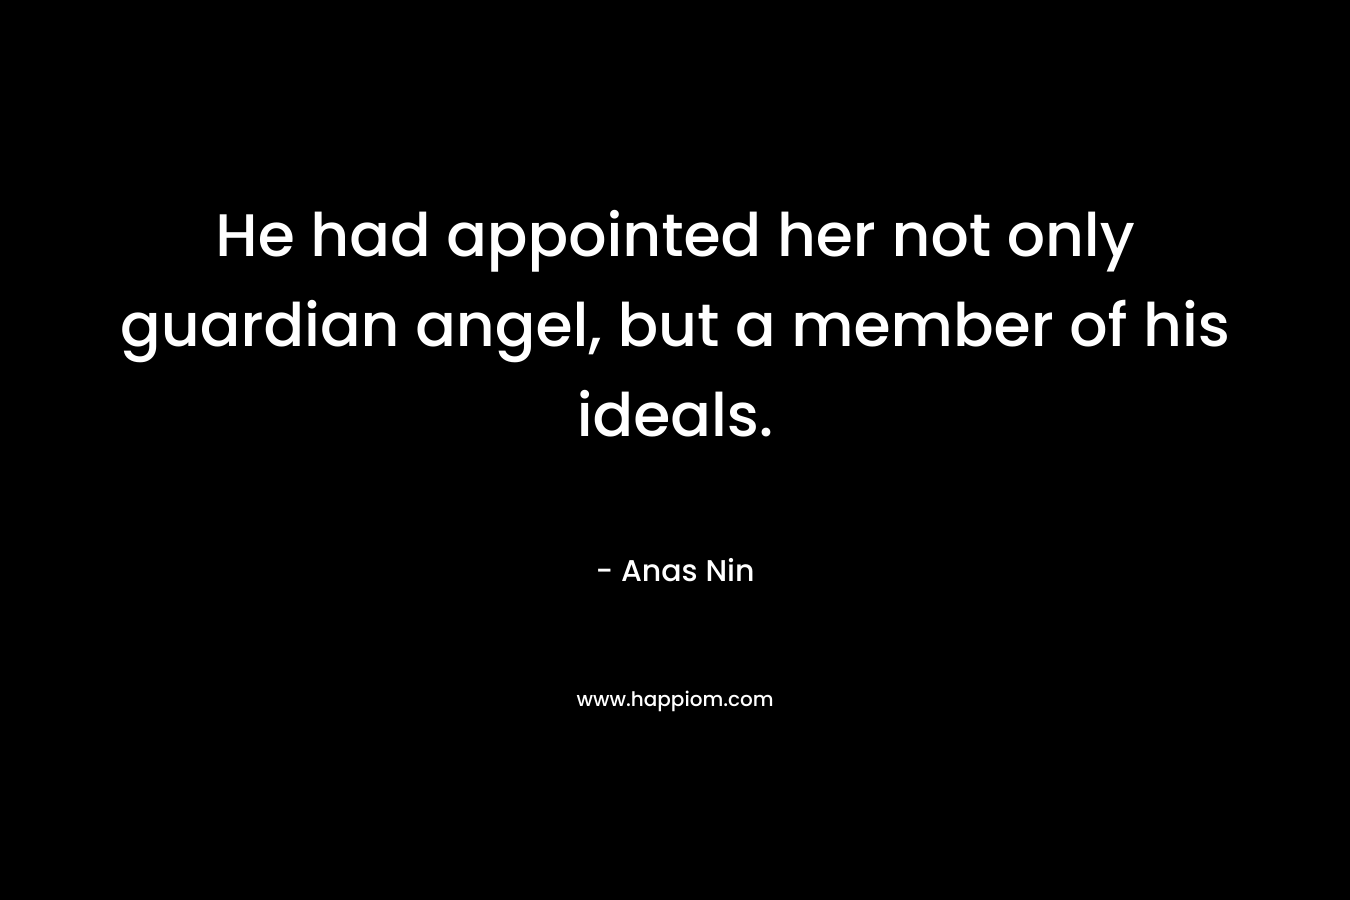 He had appointed her not only guardian angel, but a member of his ideals.